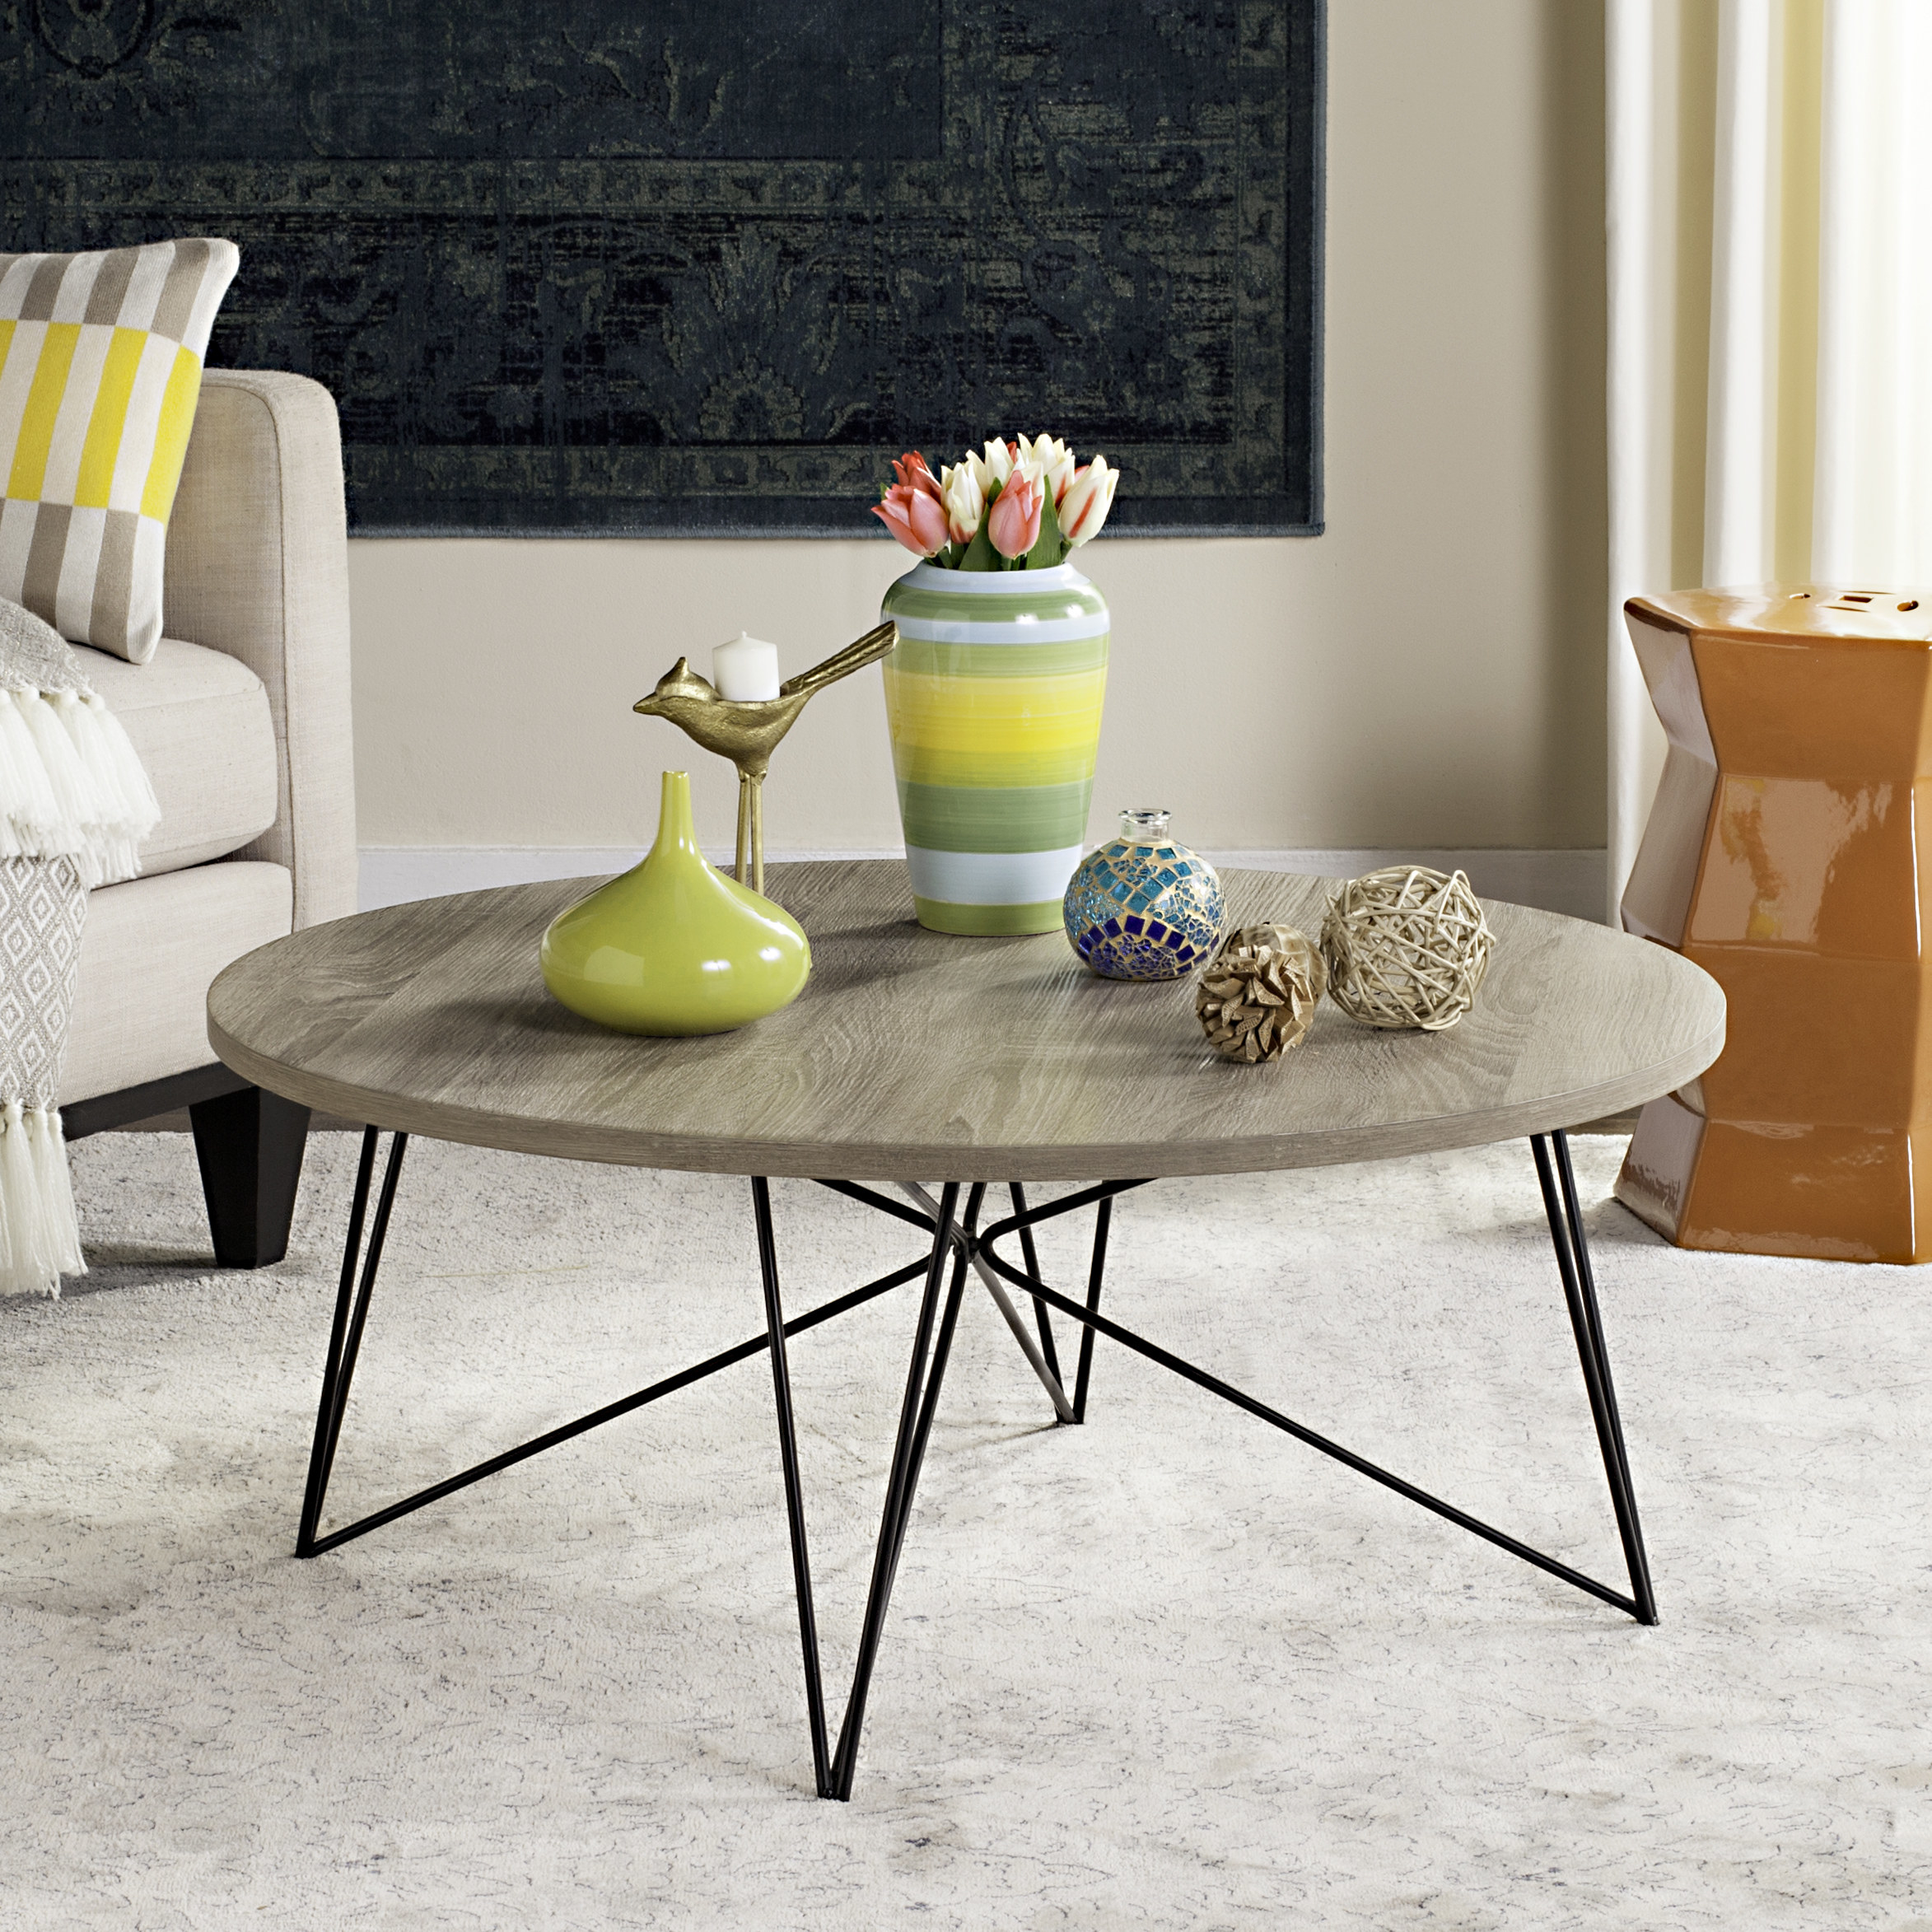 Gray and black coffee table